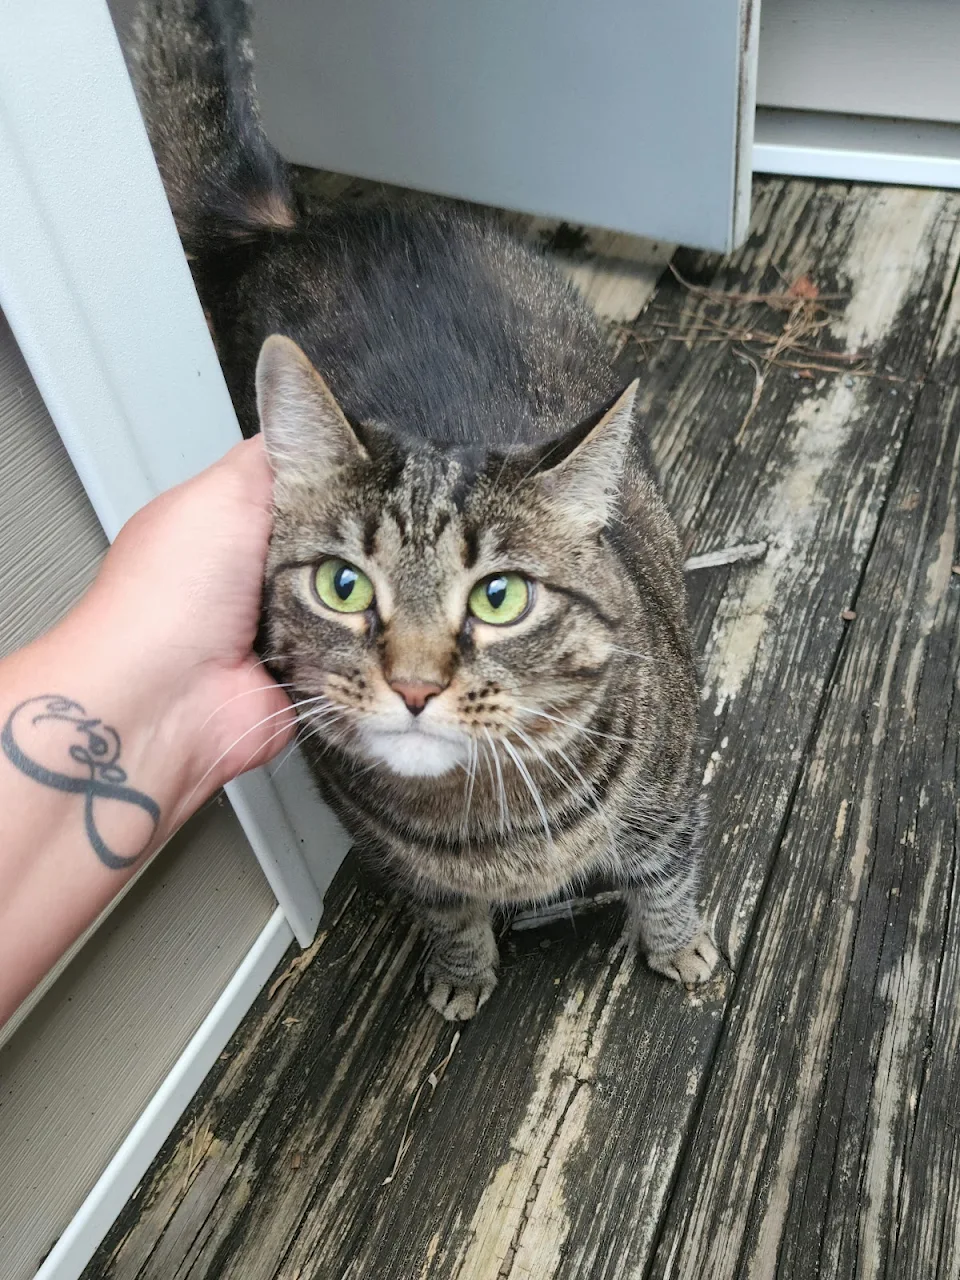 I have left my door open any time I went on my back porch for the last 5 years. Someone decided to be brave today and met the outside world for the first time.